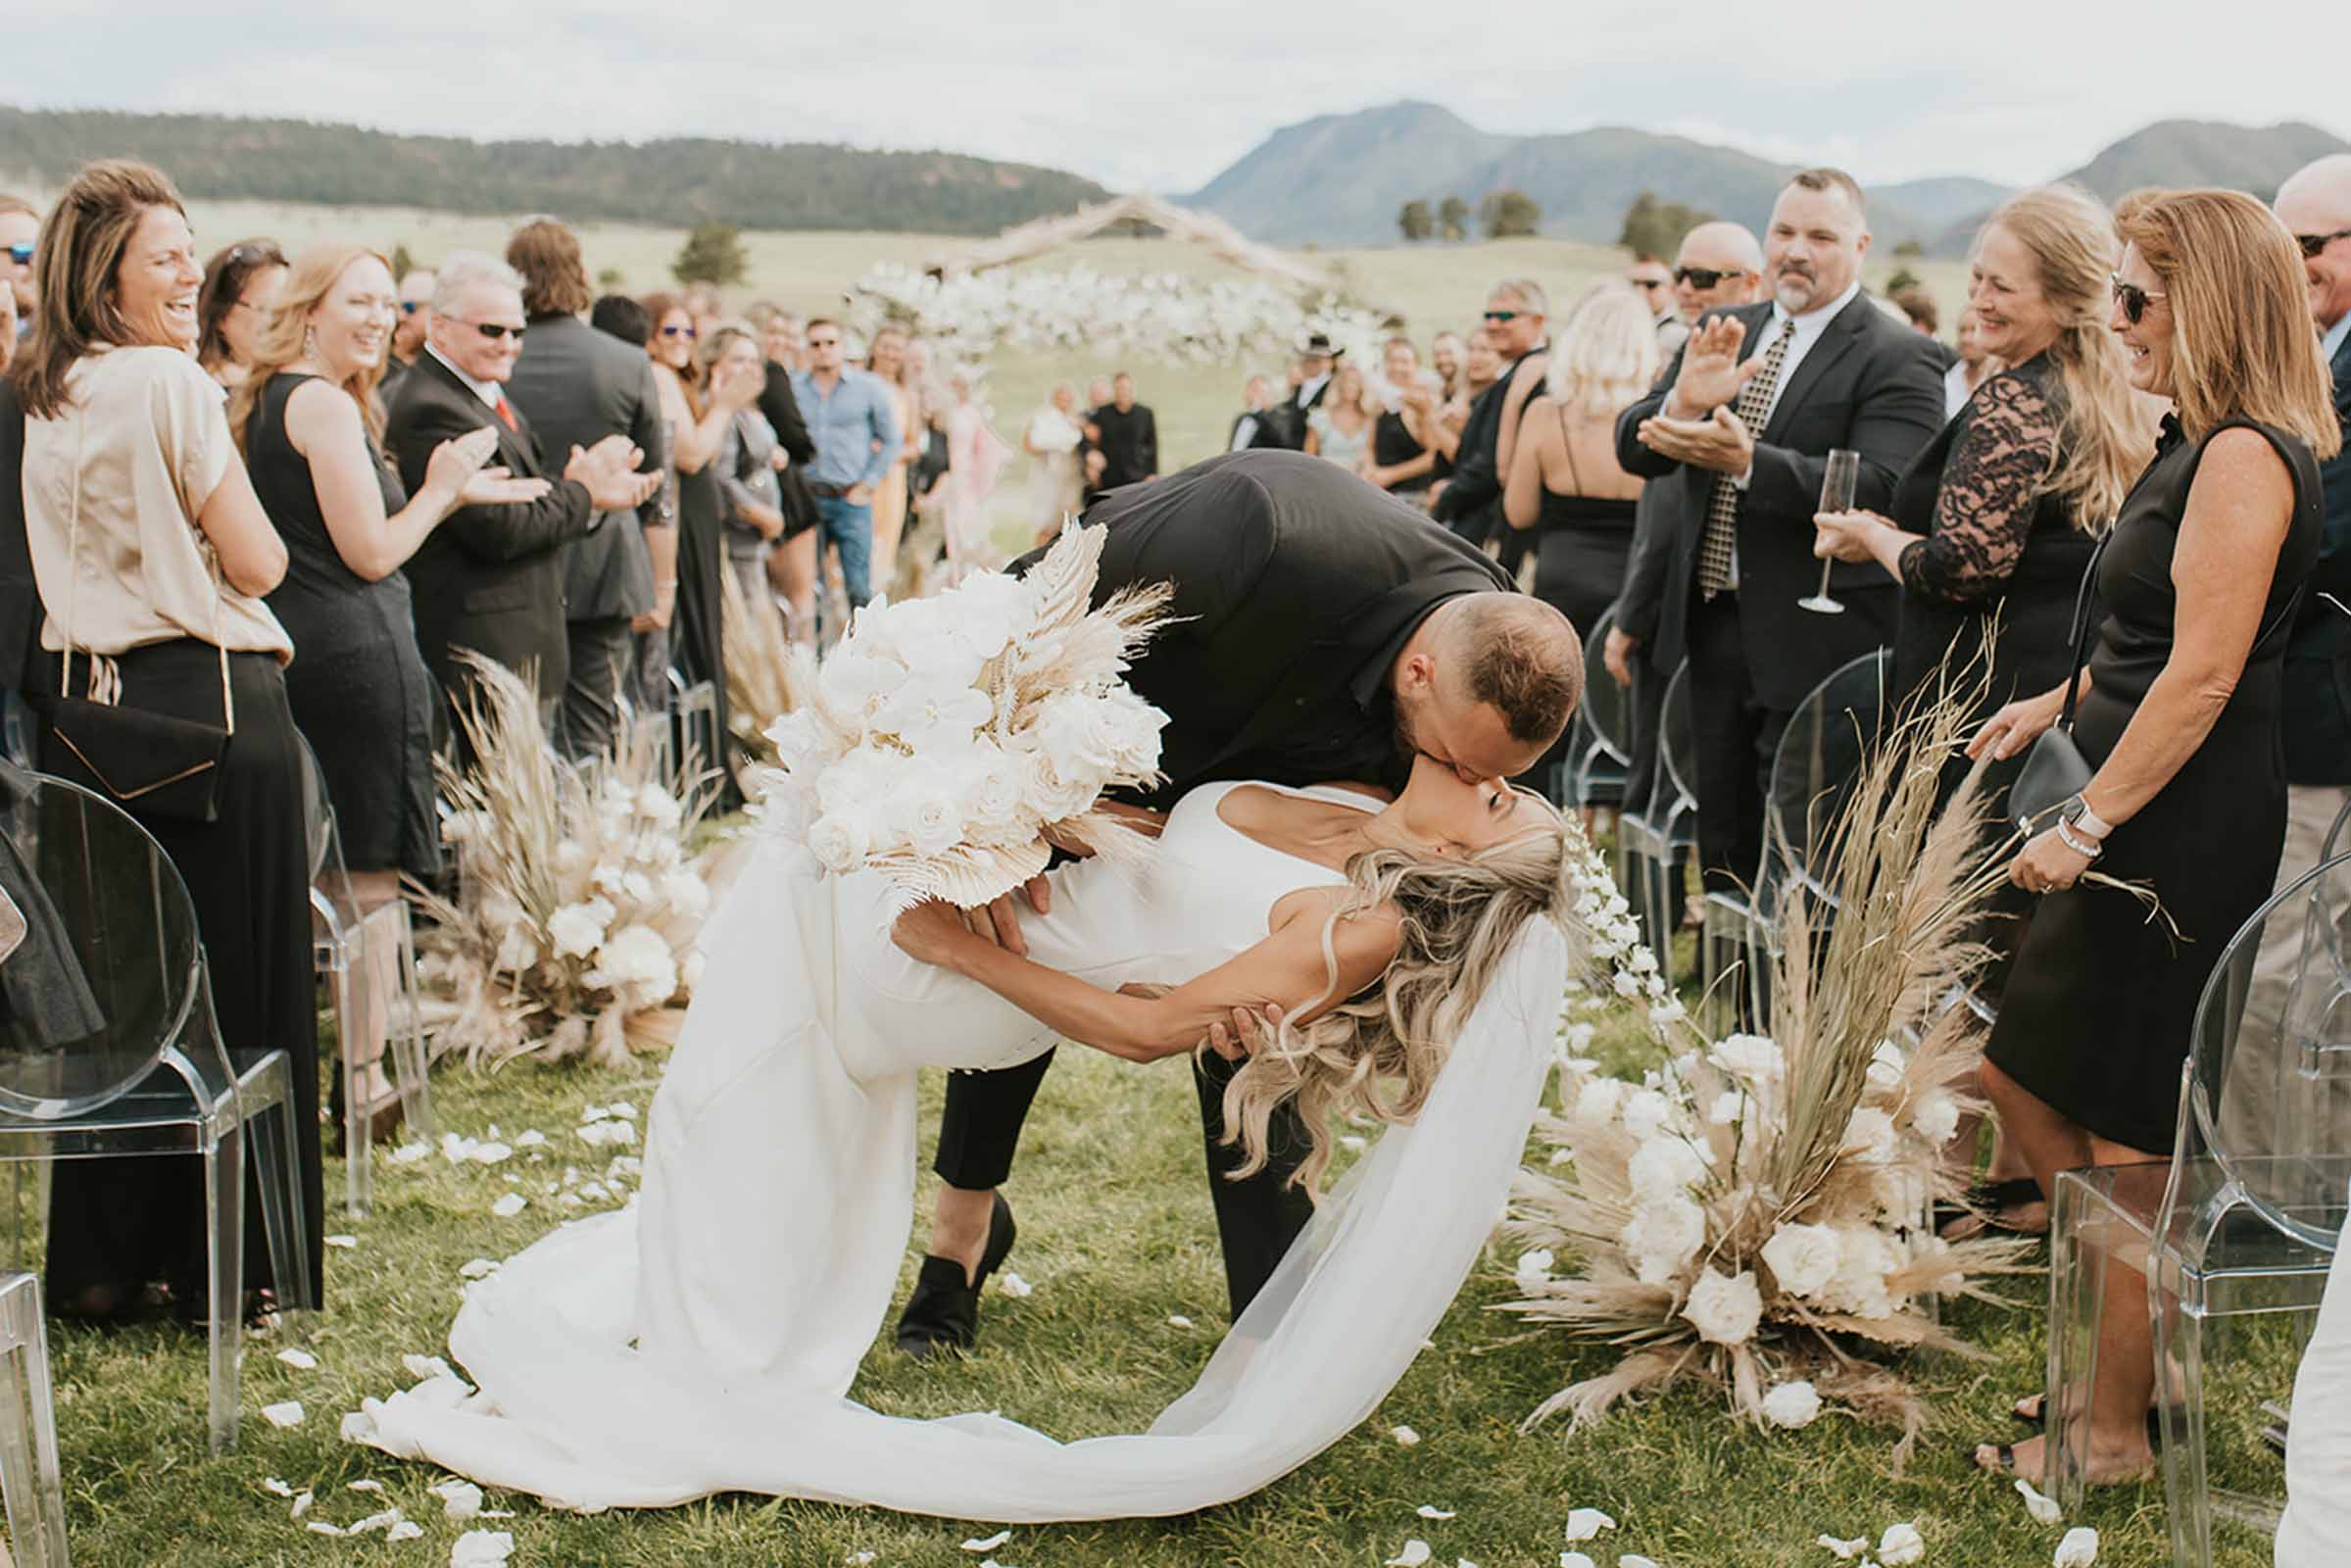 Bride and groom. sharing a romantic kiss